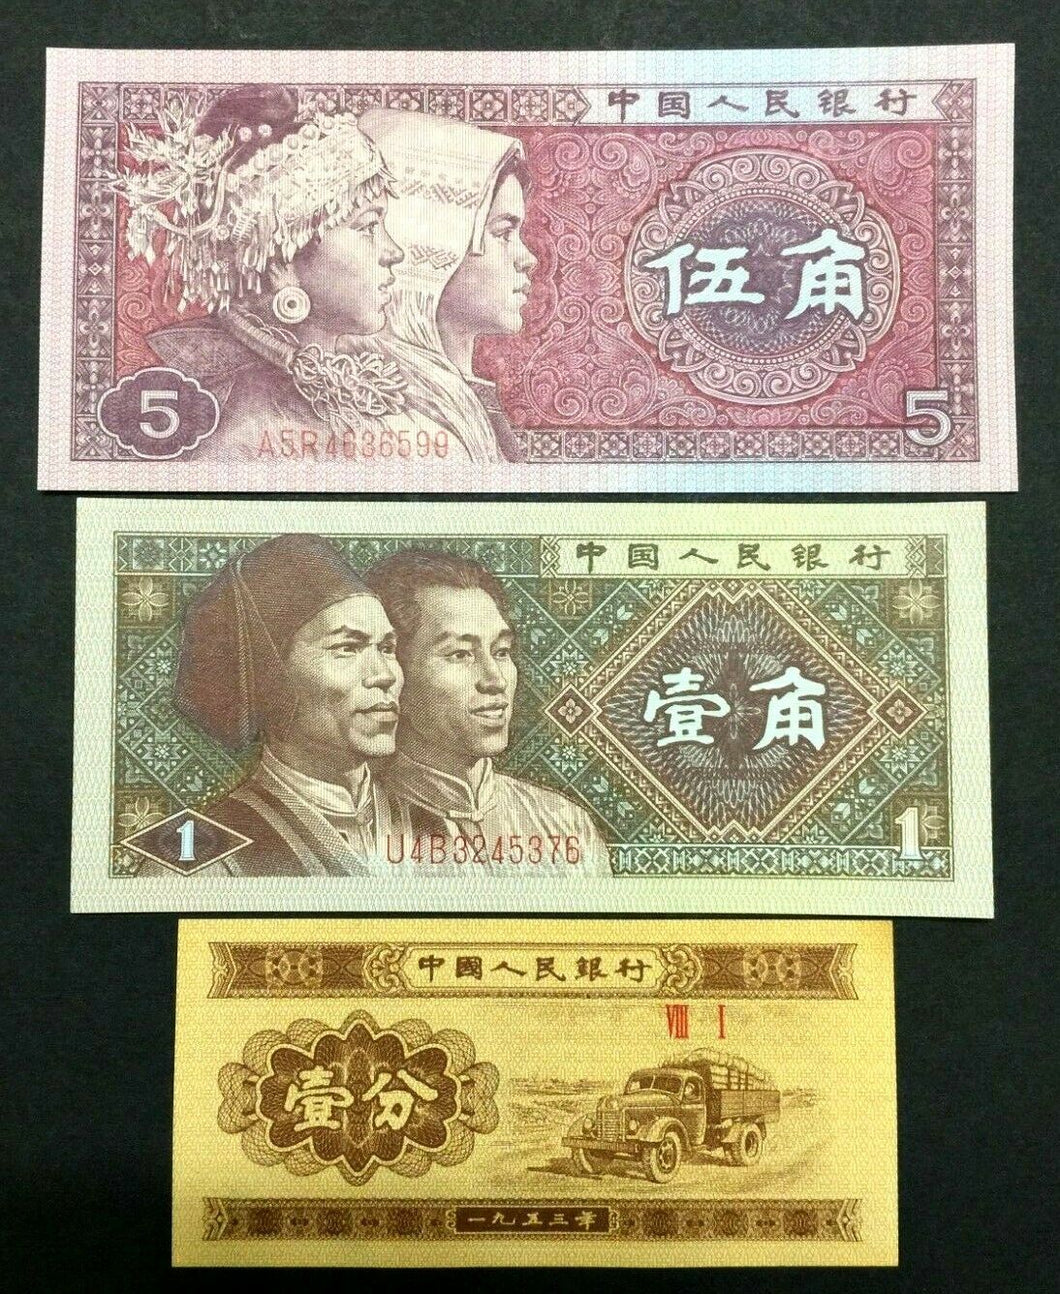 China 5 and 1 YI JIAO Banknotes World Paper Money UNC Currency Bill Notes